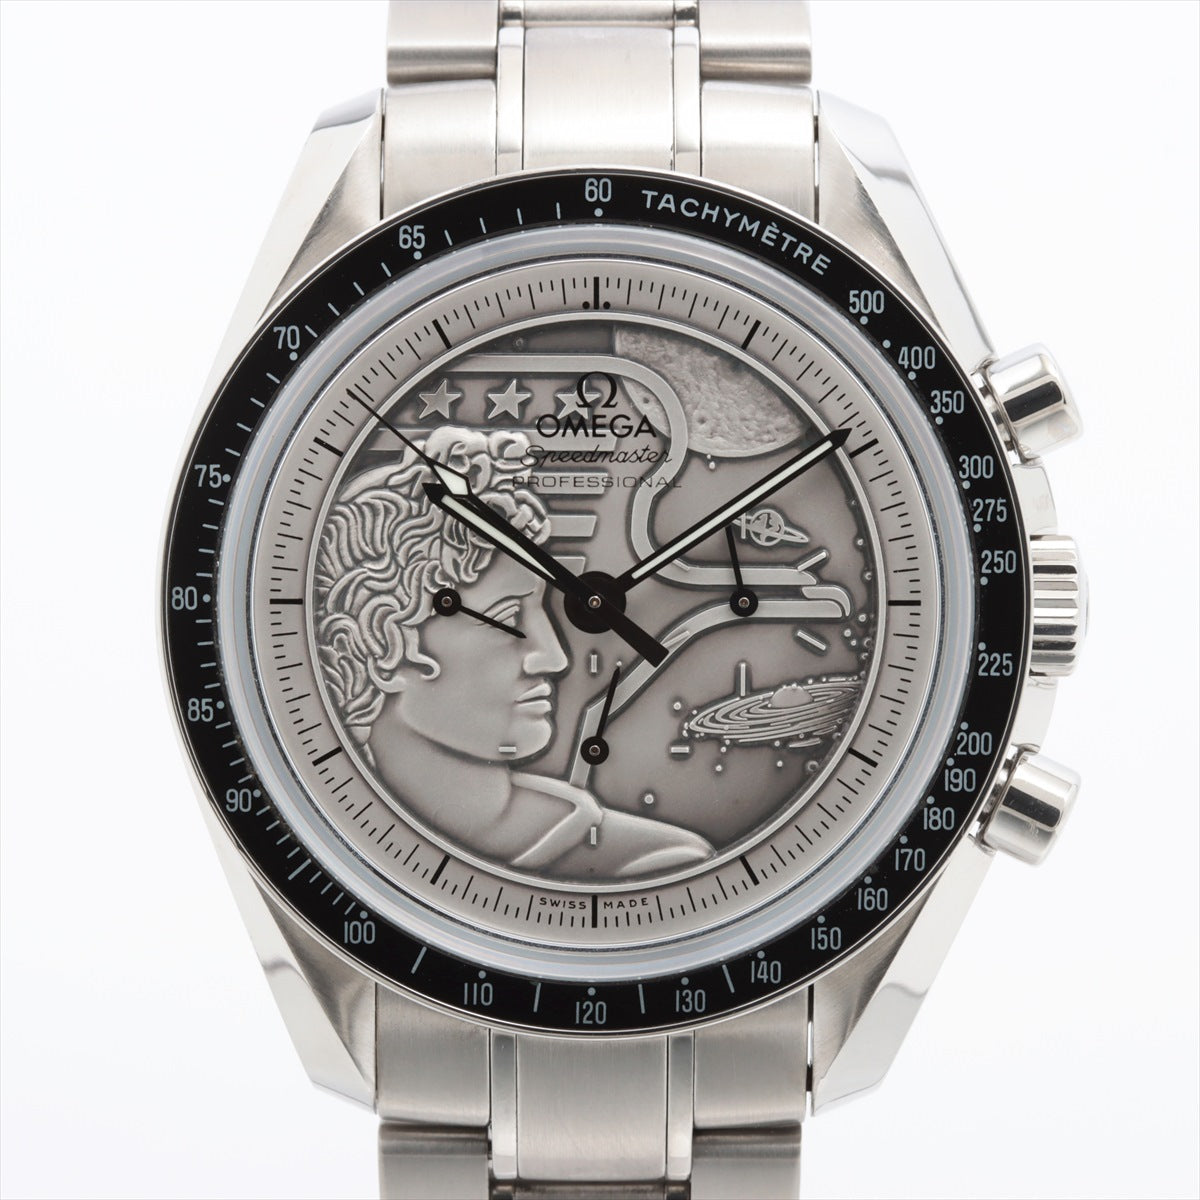 Omega Speedmaster Professional Apollo 17 40th anniversary Limited to 1972 books in the world 311.30.42.30.99.002 SS Stem-winder Silver-Face